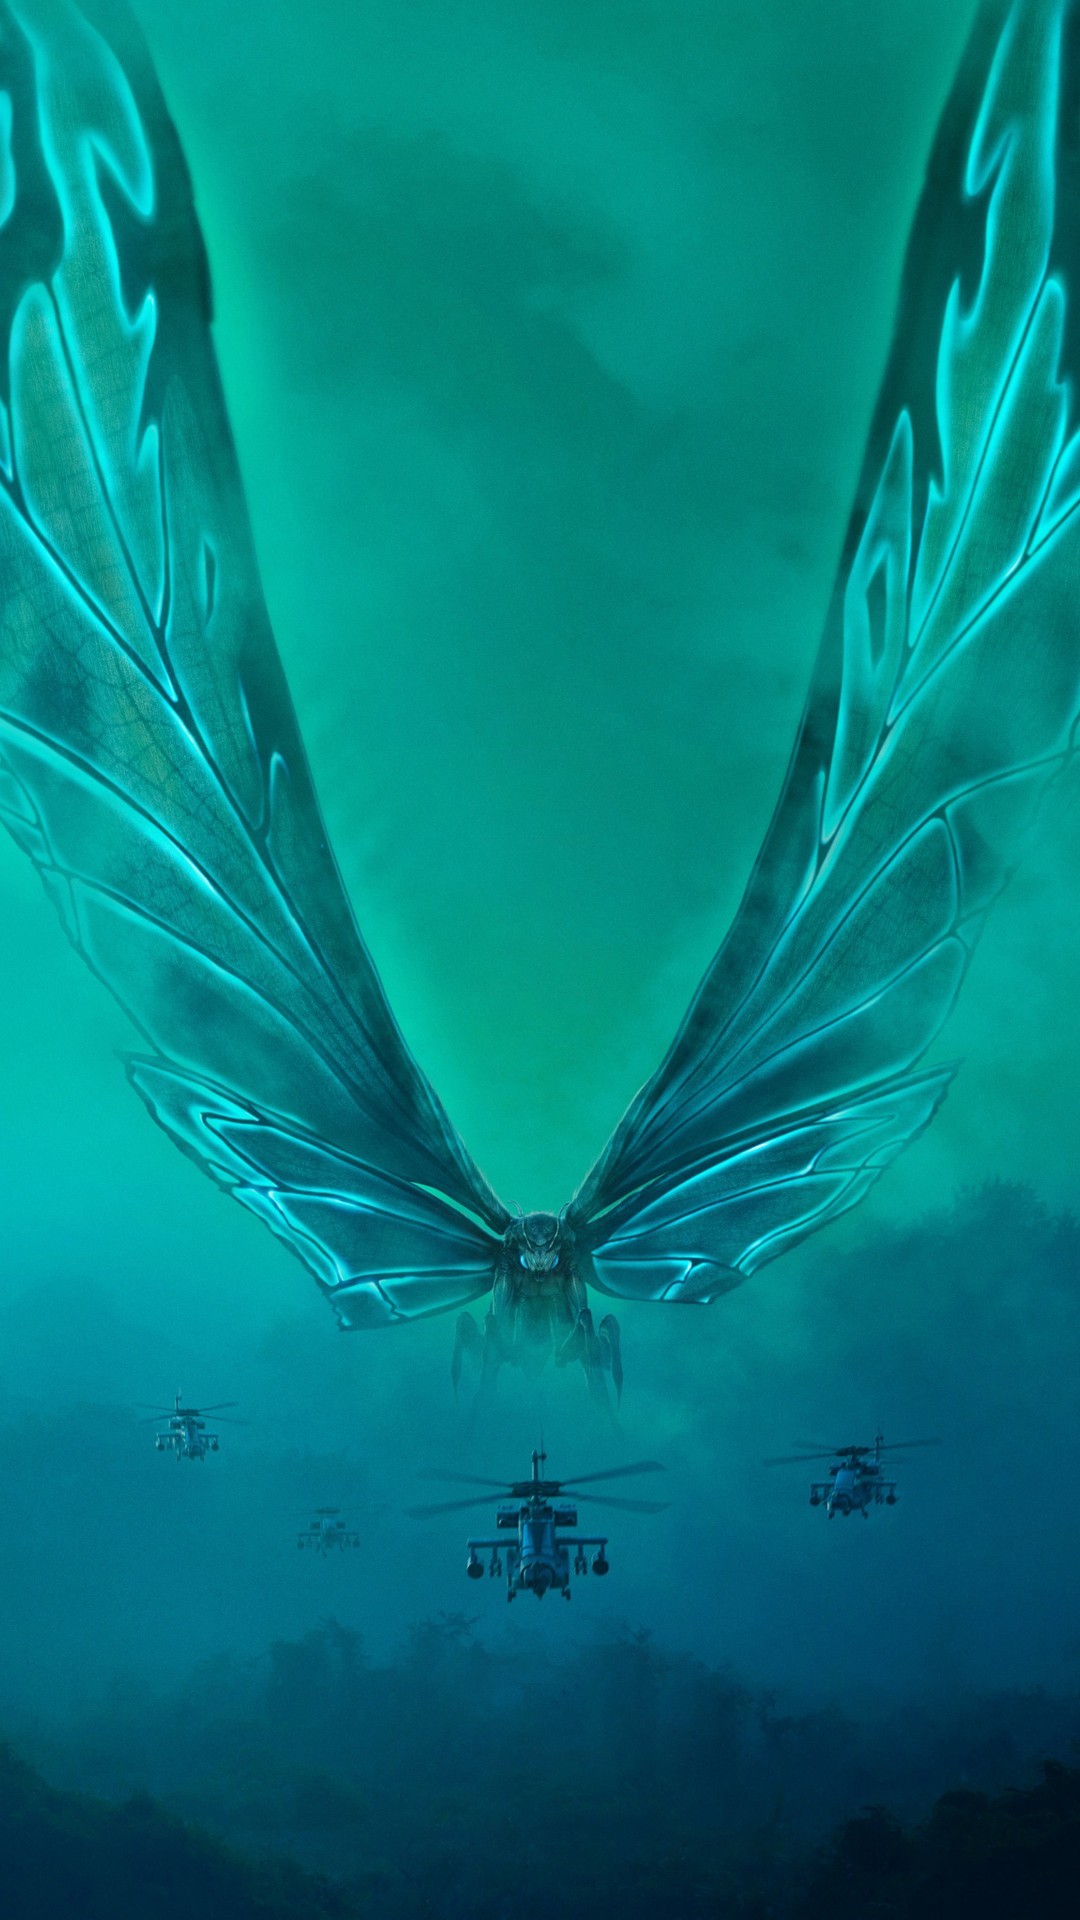 Godzilla King of the Monsters Full Movie Poster with high-resolution 1080x1920 pixel. You can use this poster wallpaper for your Desktop Computers, Mac Screensavers, Windows Backgrounds, iPhone Wallpapers, Tablet or Android Lock screen and another Mobile device